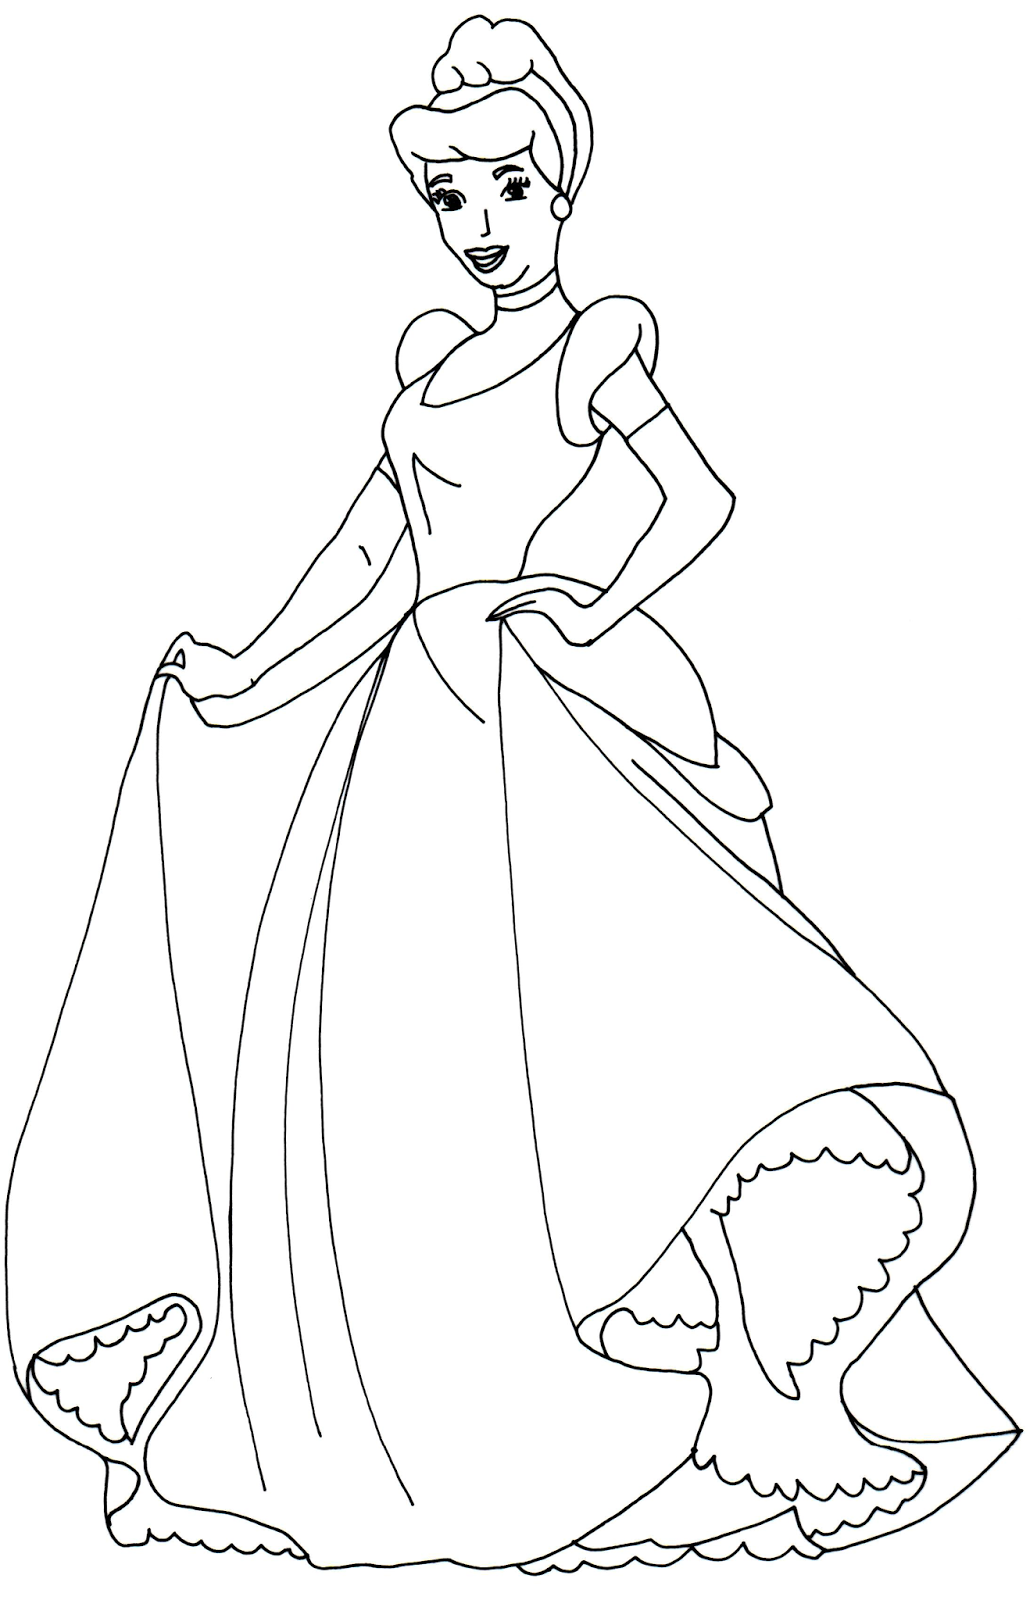 Sofia The First Coloring Pages: Cinderella - Sofia The First Coloring Page